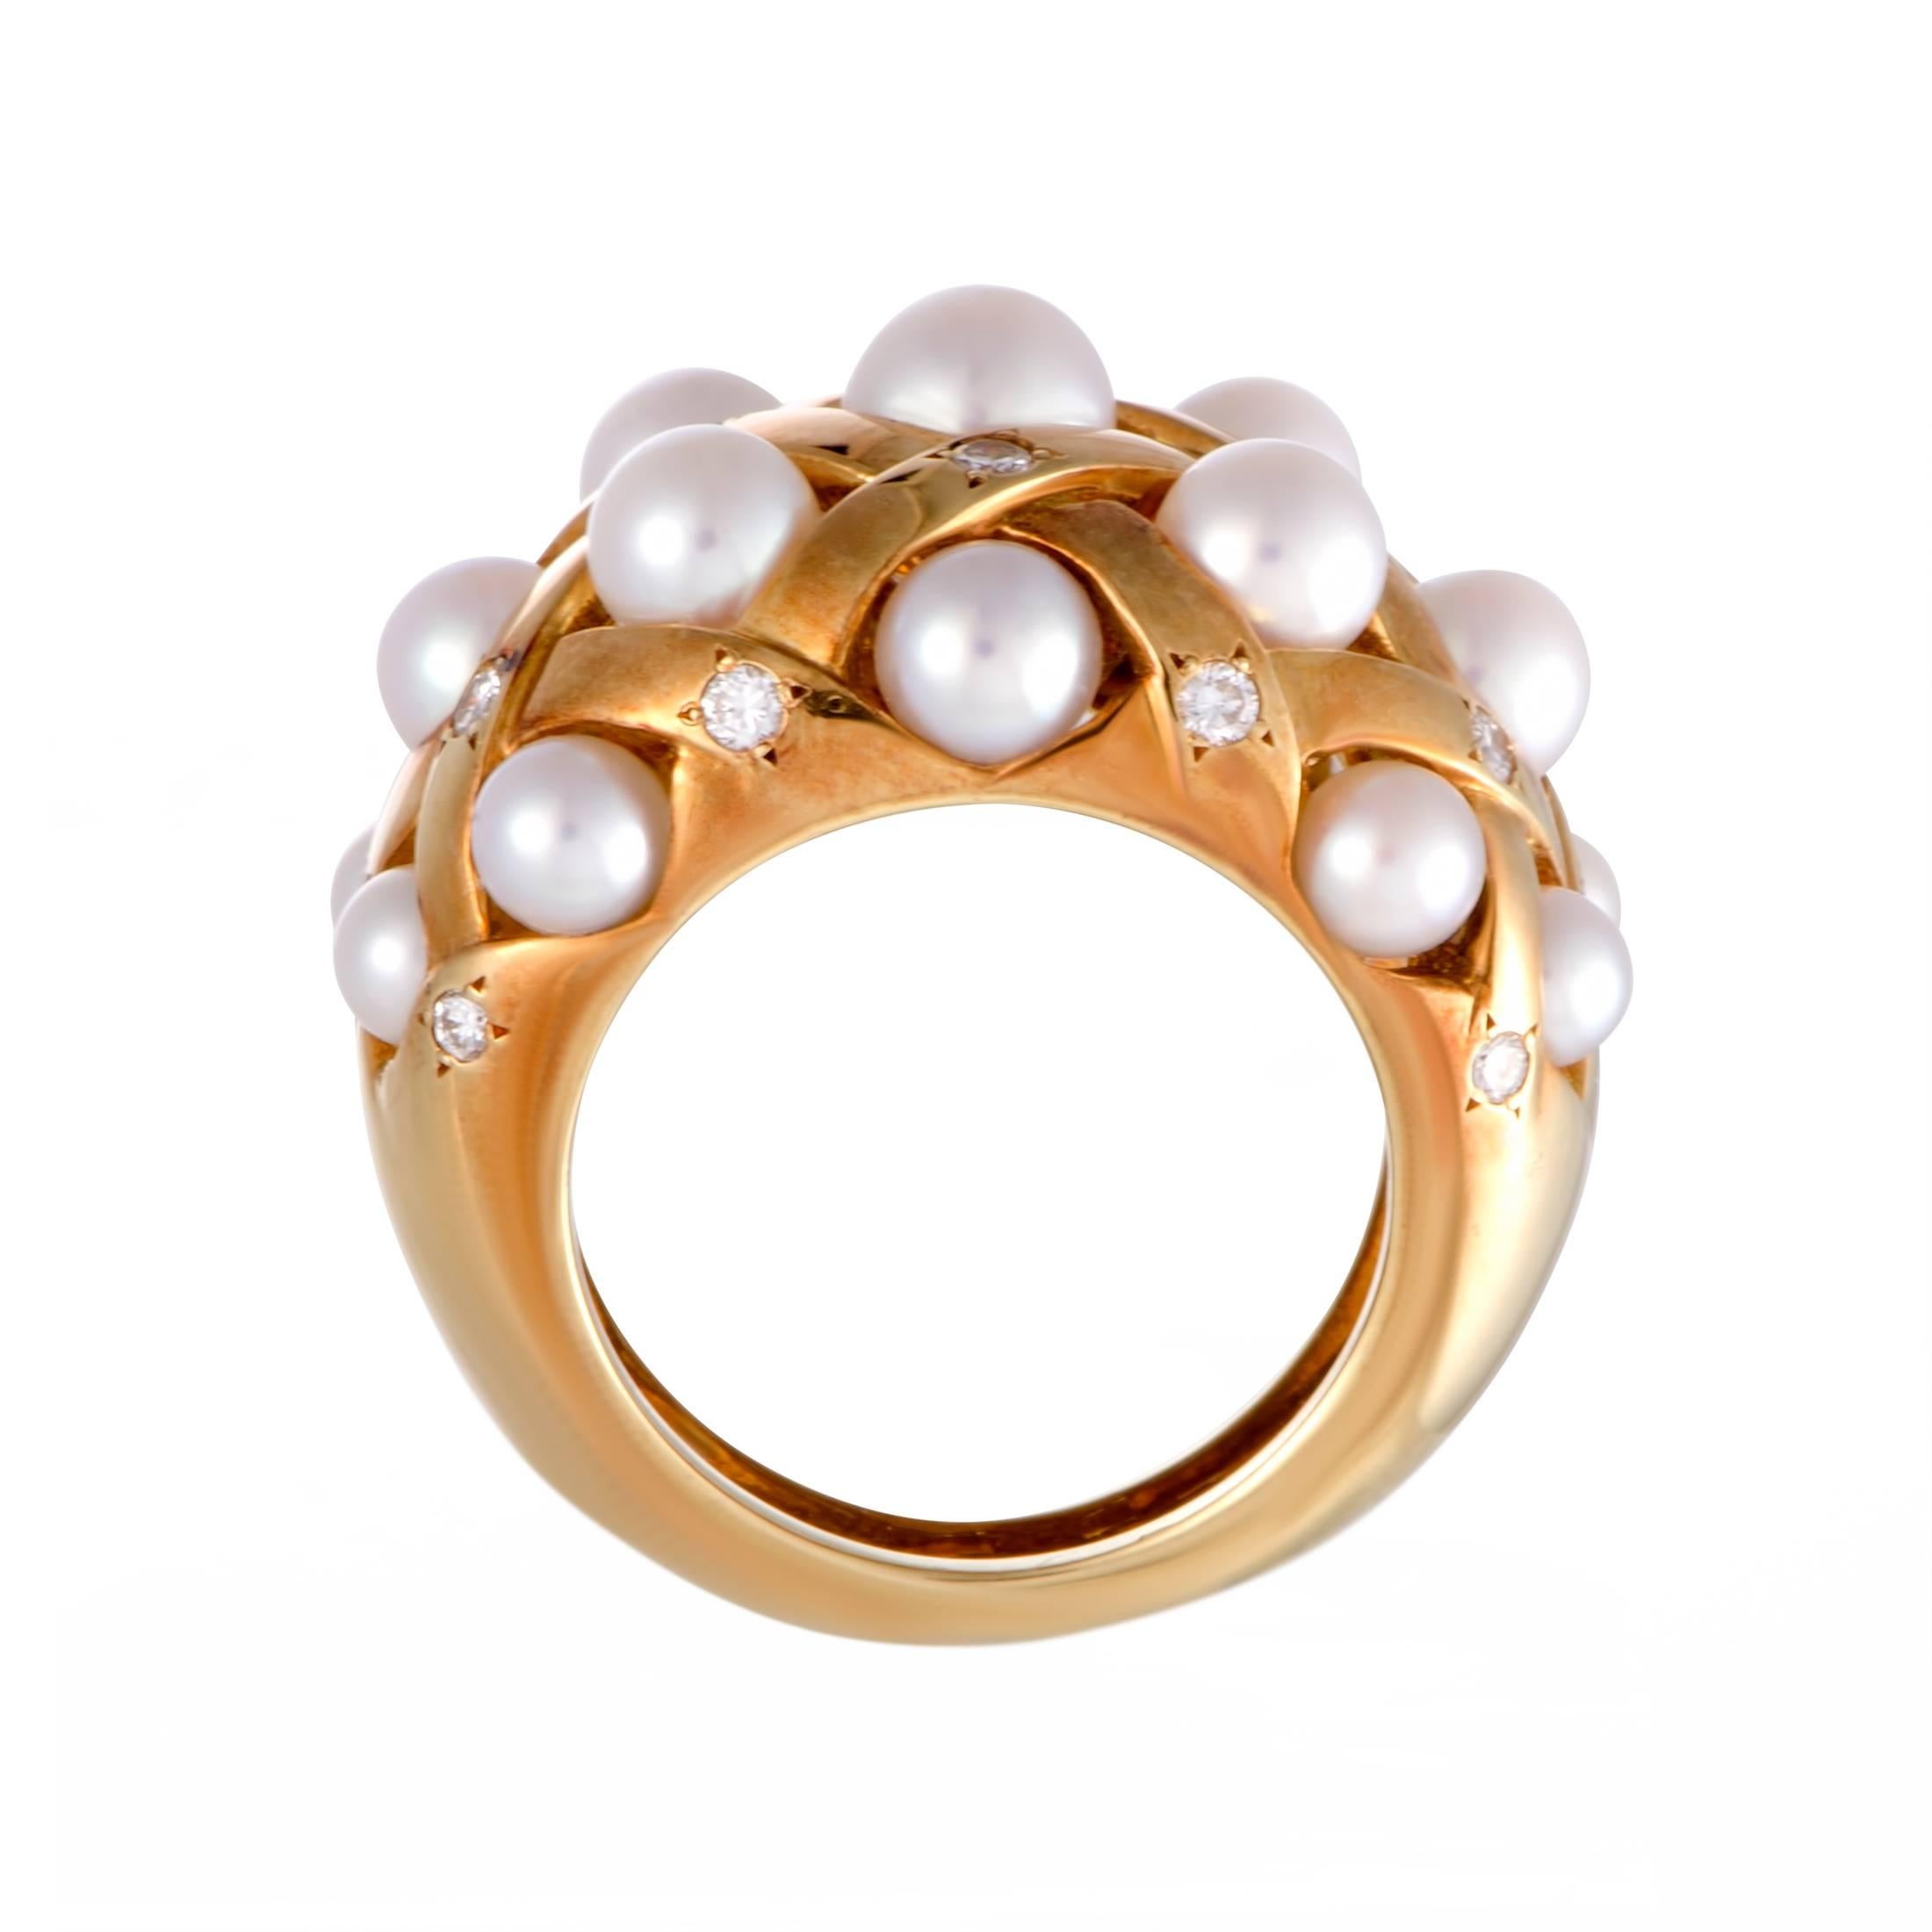 Proving yet again that they’re masters of the craft when it comes to designing gorgeous feminine pieces, Chanel presented this compelling ring made of 18K yellow gold. The ring is alluringly decorated with scintillating diamonds and splendid white